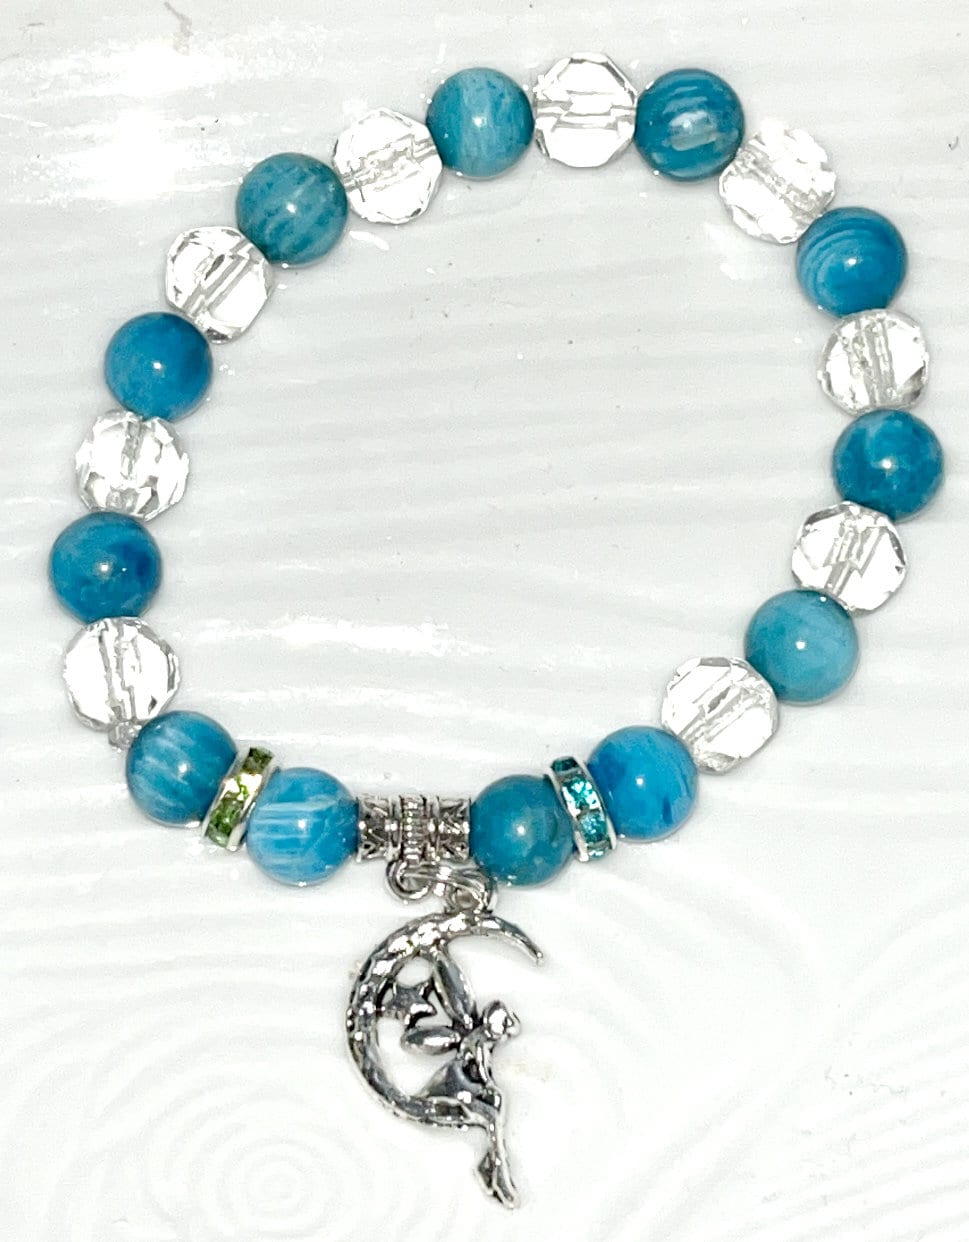 Amazonite crystal bracelet with Lotus flower charm or fairy on moon charm. Handmade. Tranquil soothing vibrations, calm, balance, & harmony